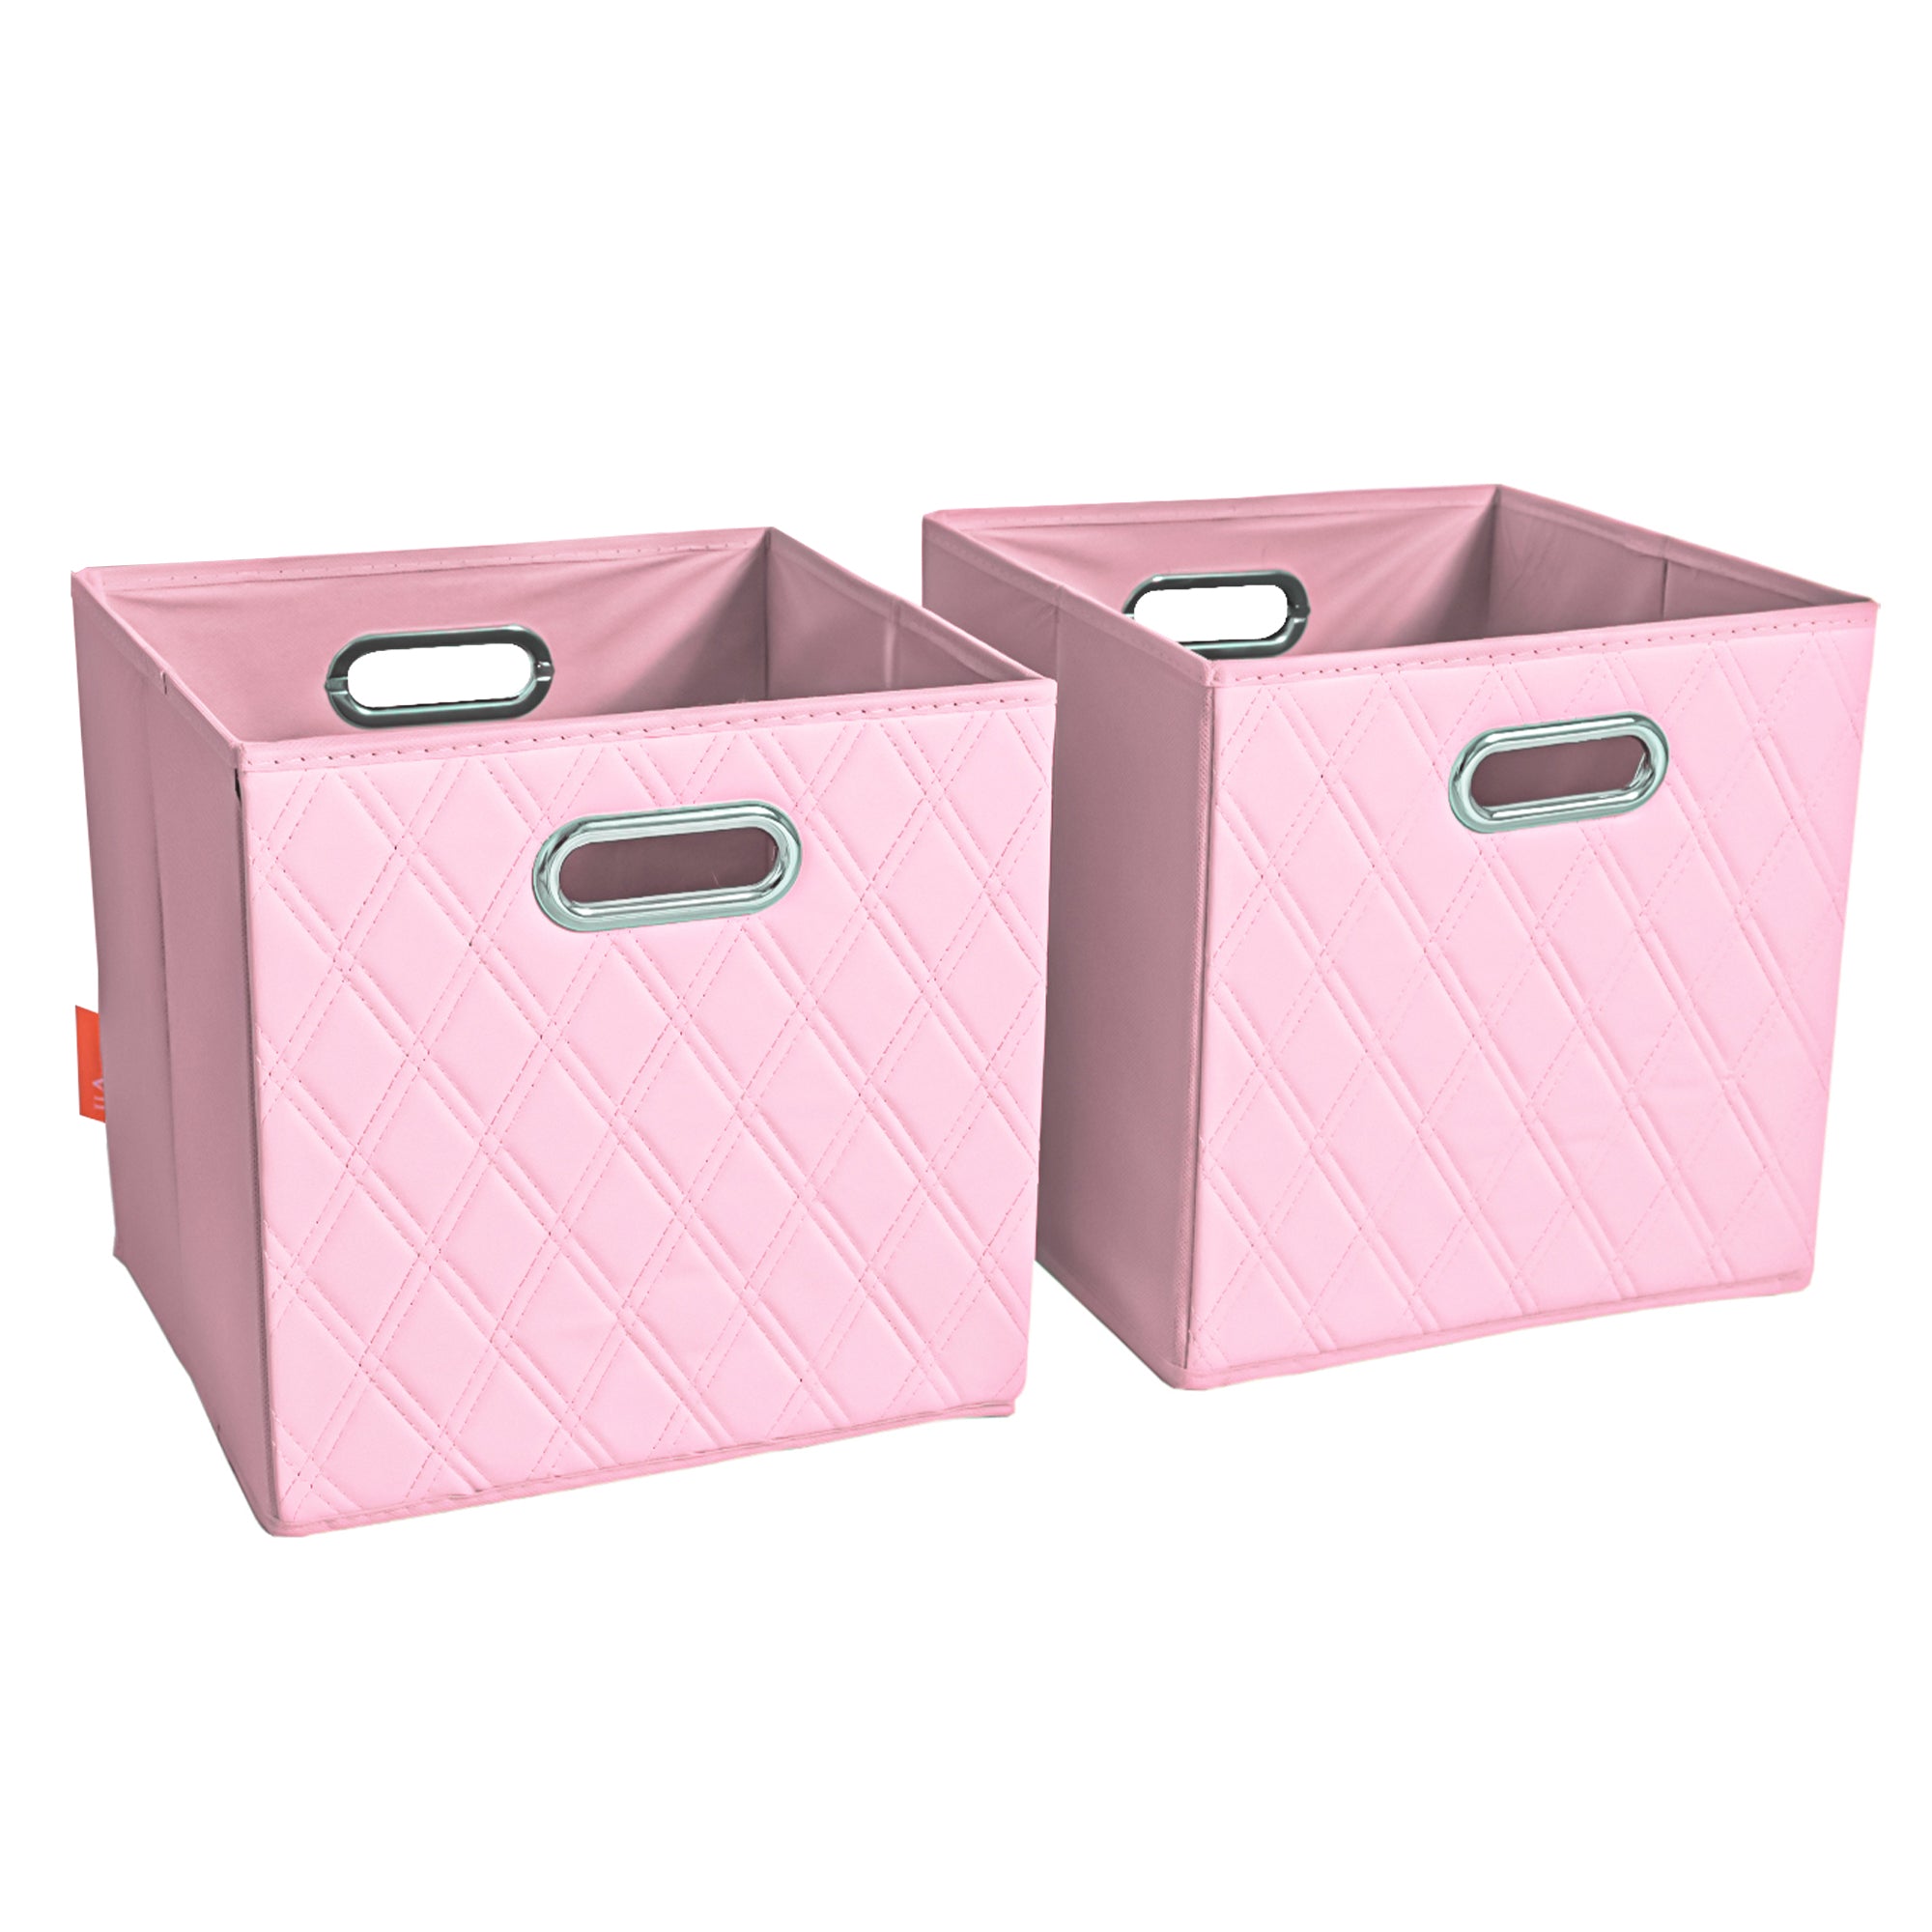 JIAessentials 11 inch Foldable Diamond Patterned Faux Leather Storage Cube Bins Set of Two with Dual Handles - 11" Pink